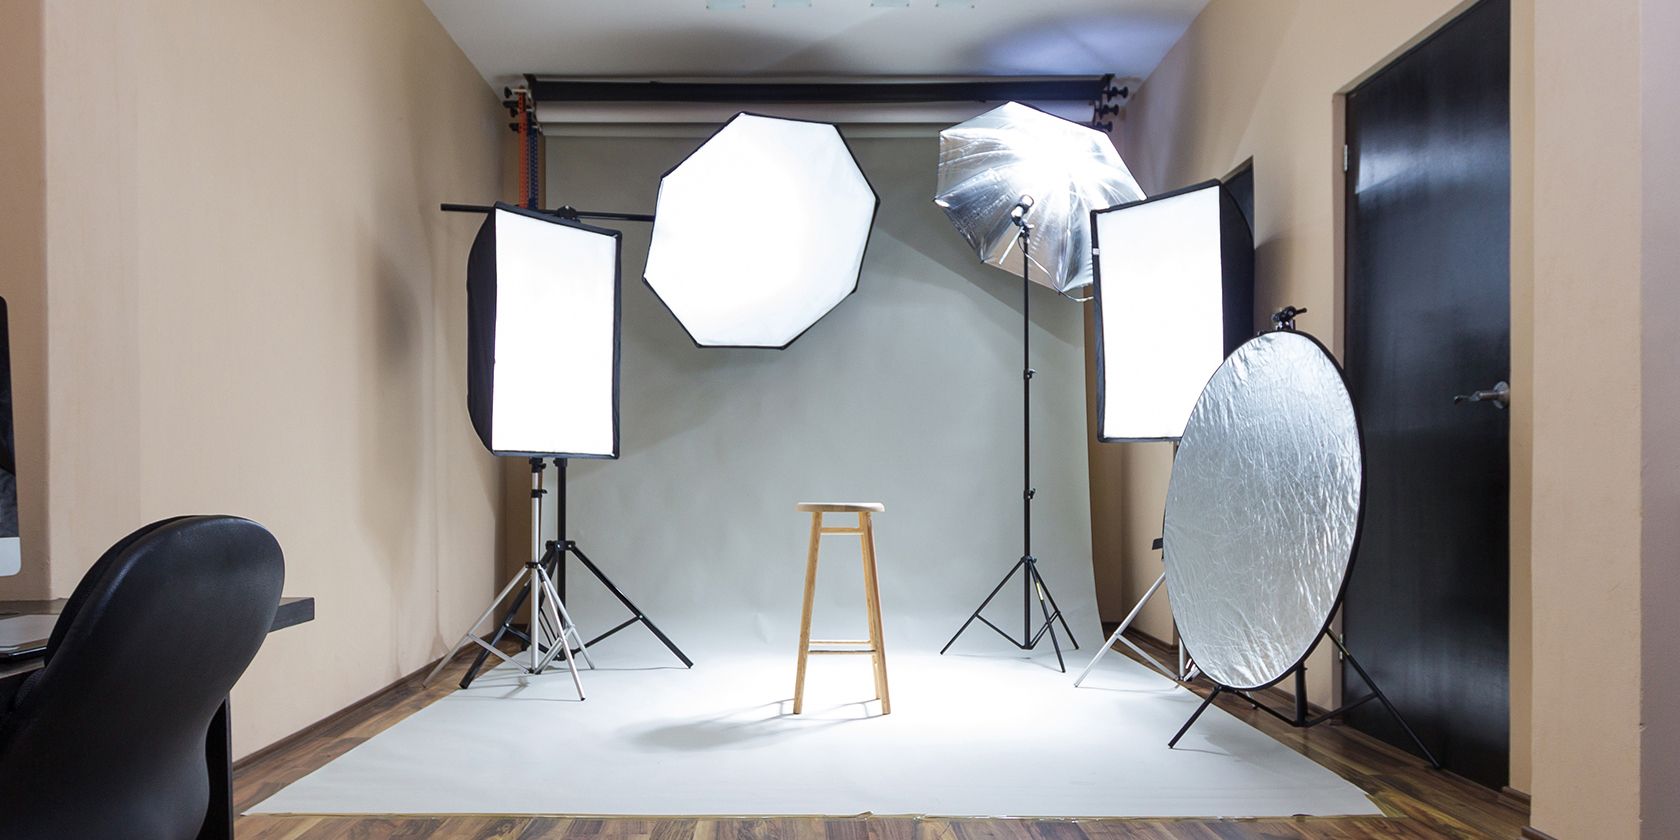 Using a Bounce Light Reflector for Outdoor Photography